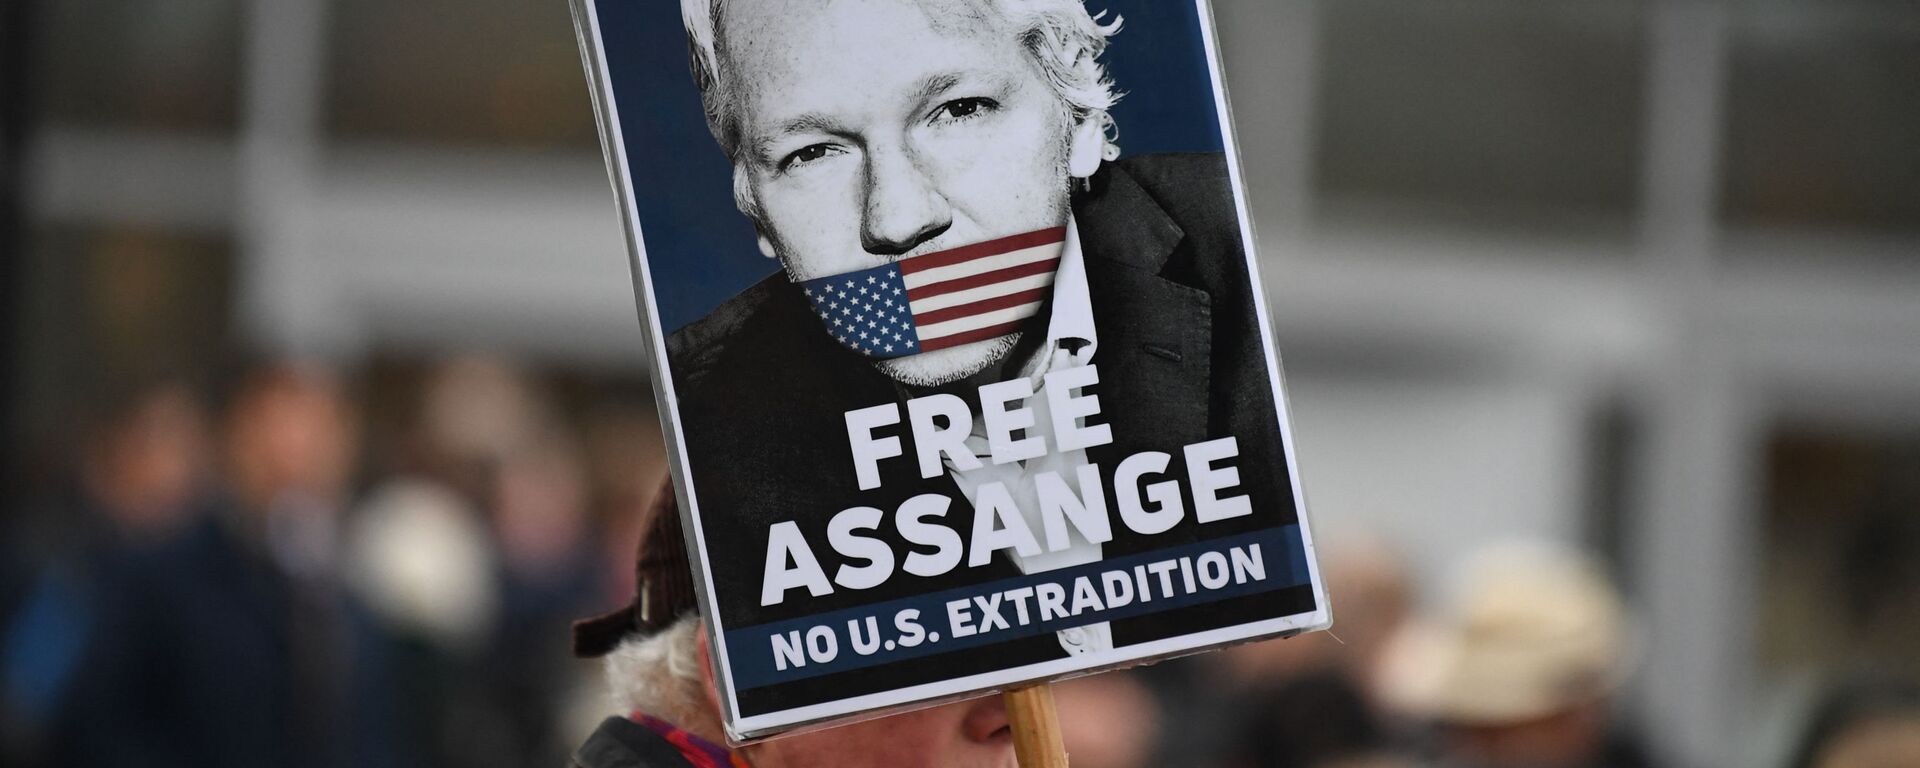 A supporter of WikiLeaks founder Julian Assange holds a placard calling for his freedom outside Woolwich Crown Court and HMP Belmarsh prison in southeast London on February 24, 2020, ahead of the opening of the trial to hear a US request for Assange's extradition - Sputnik International, 1920, 29.10.2021